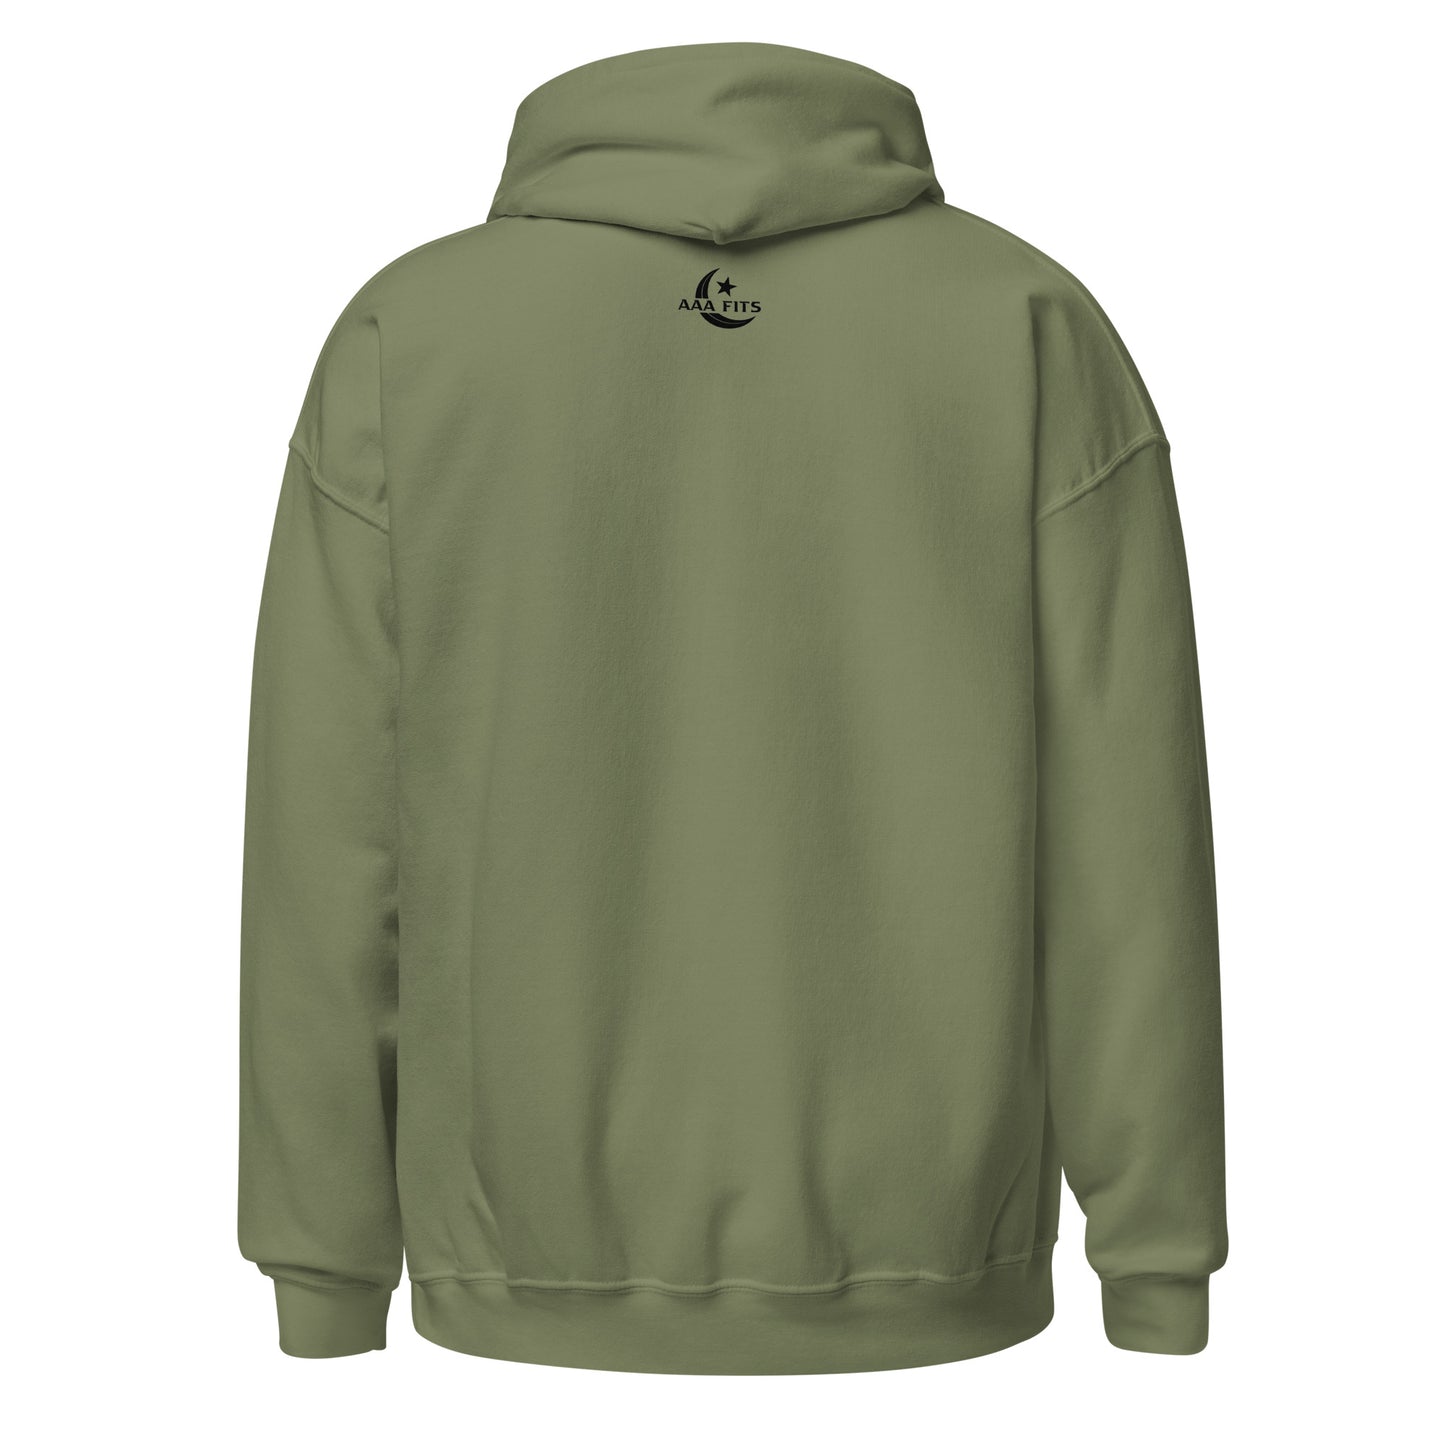 Beast From The Middle East Hoodie (LIGHT)